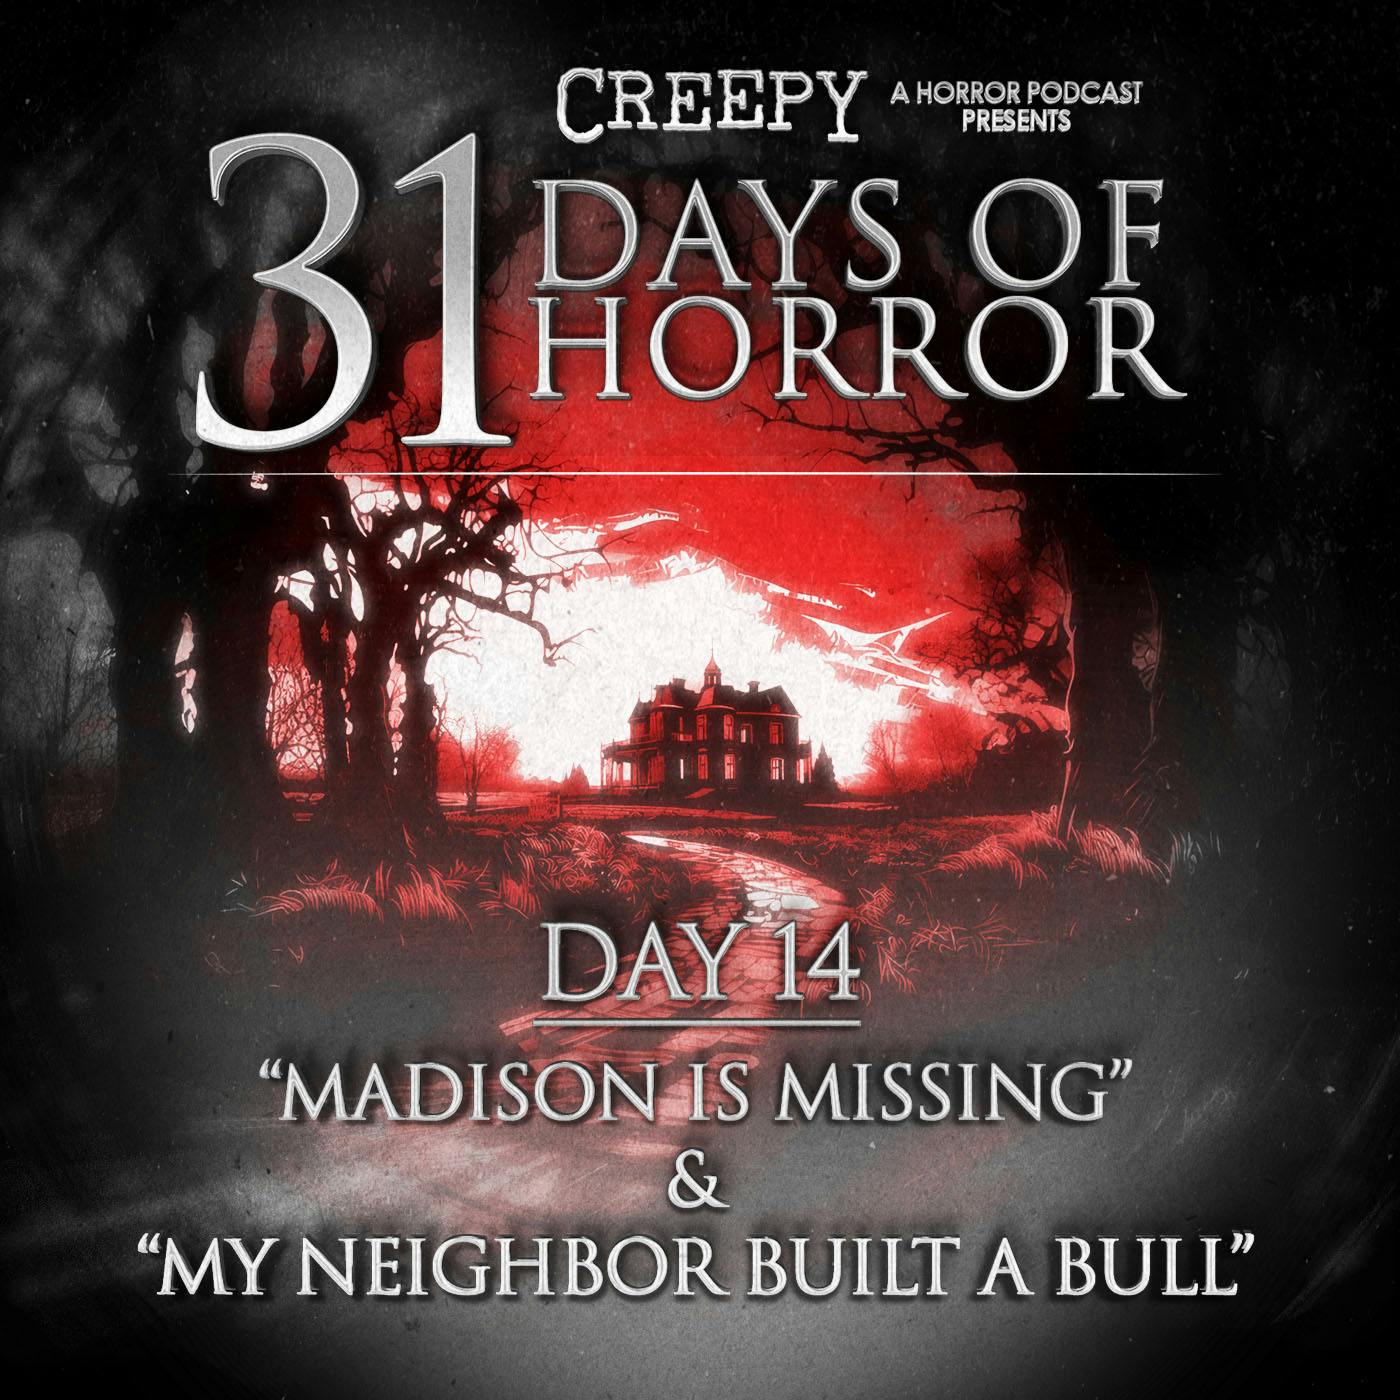 Day 14 - Madison is Missing & My Neighbor Built a Bull